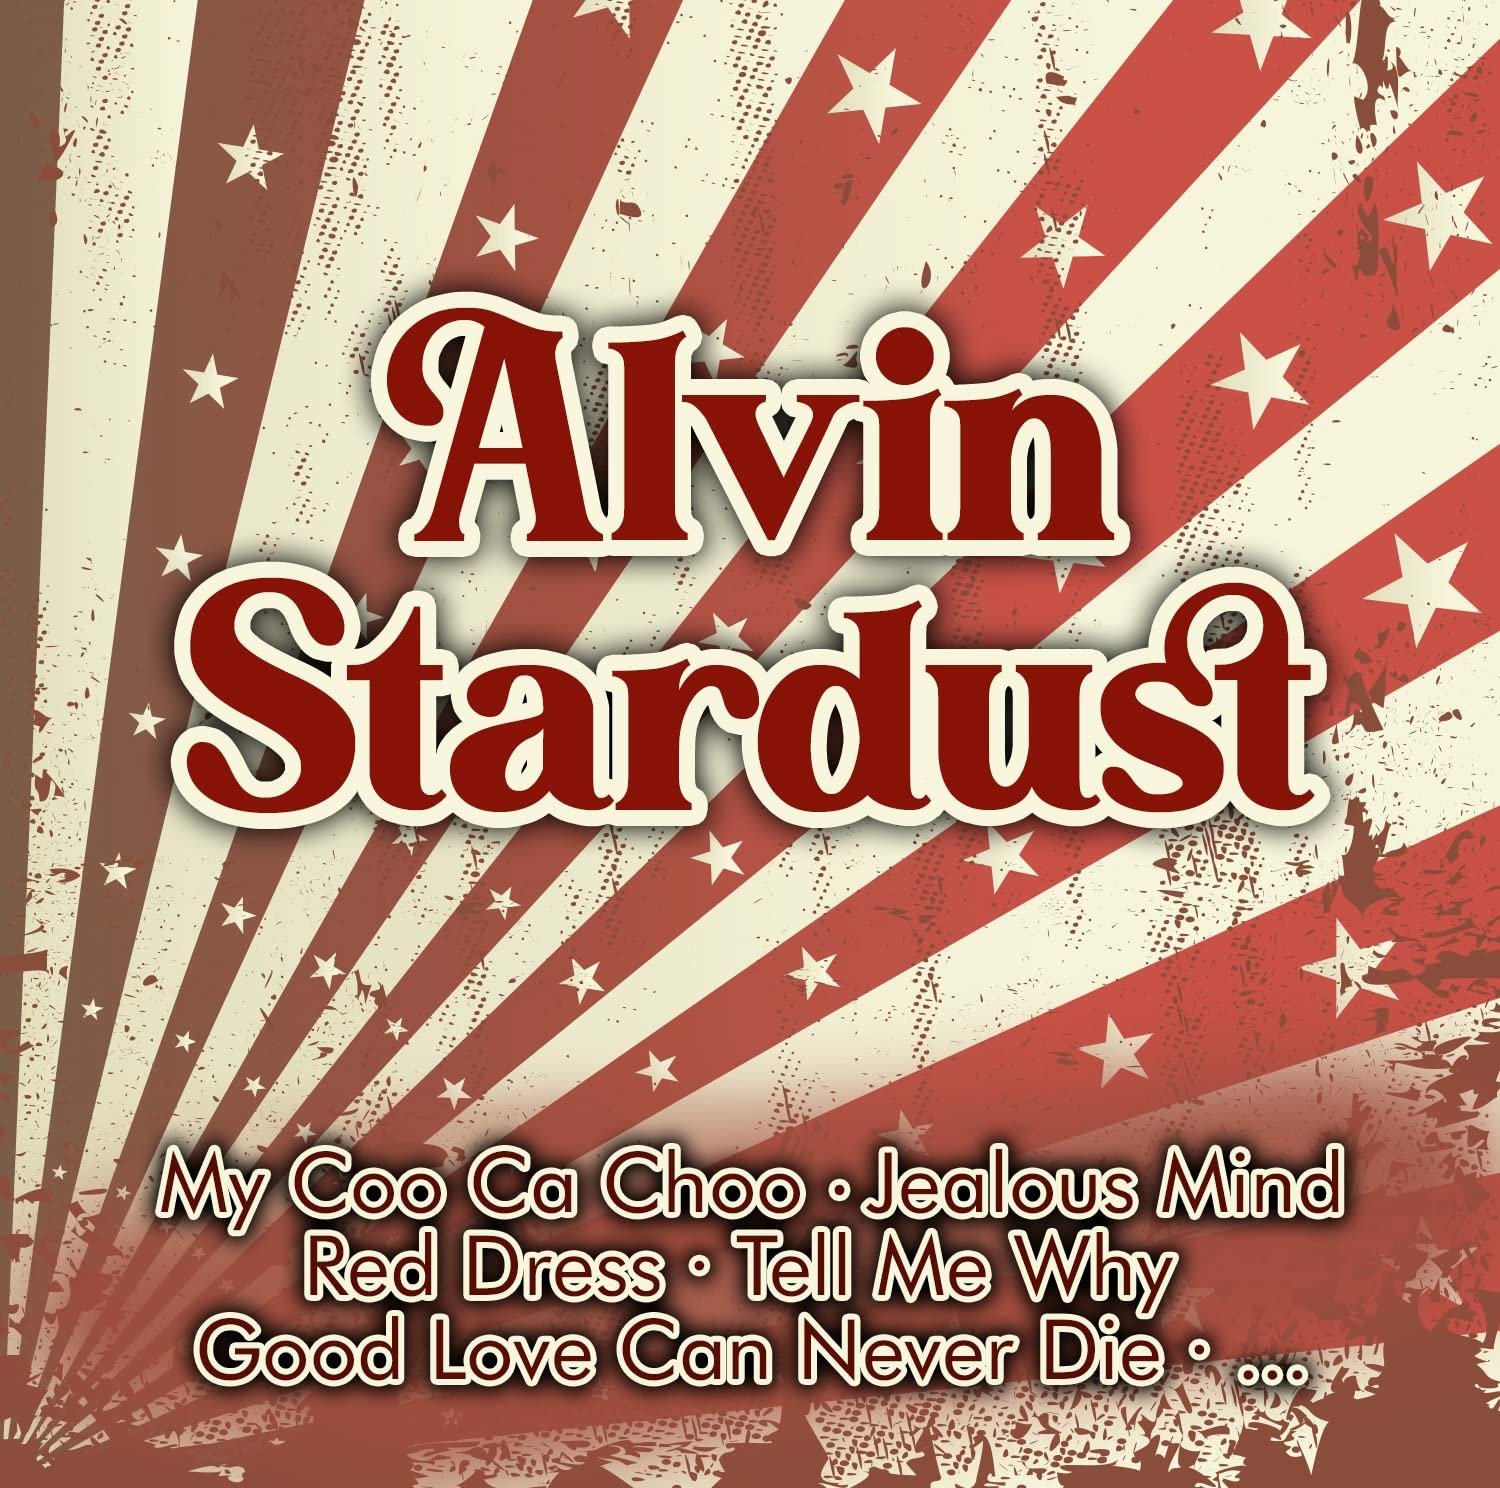 CD Shop - STARDUST, ALVIN HIS GREATEST HITS